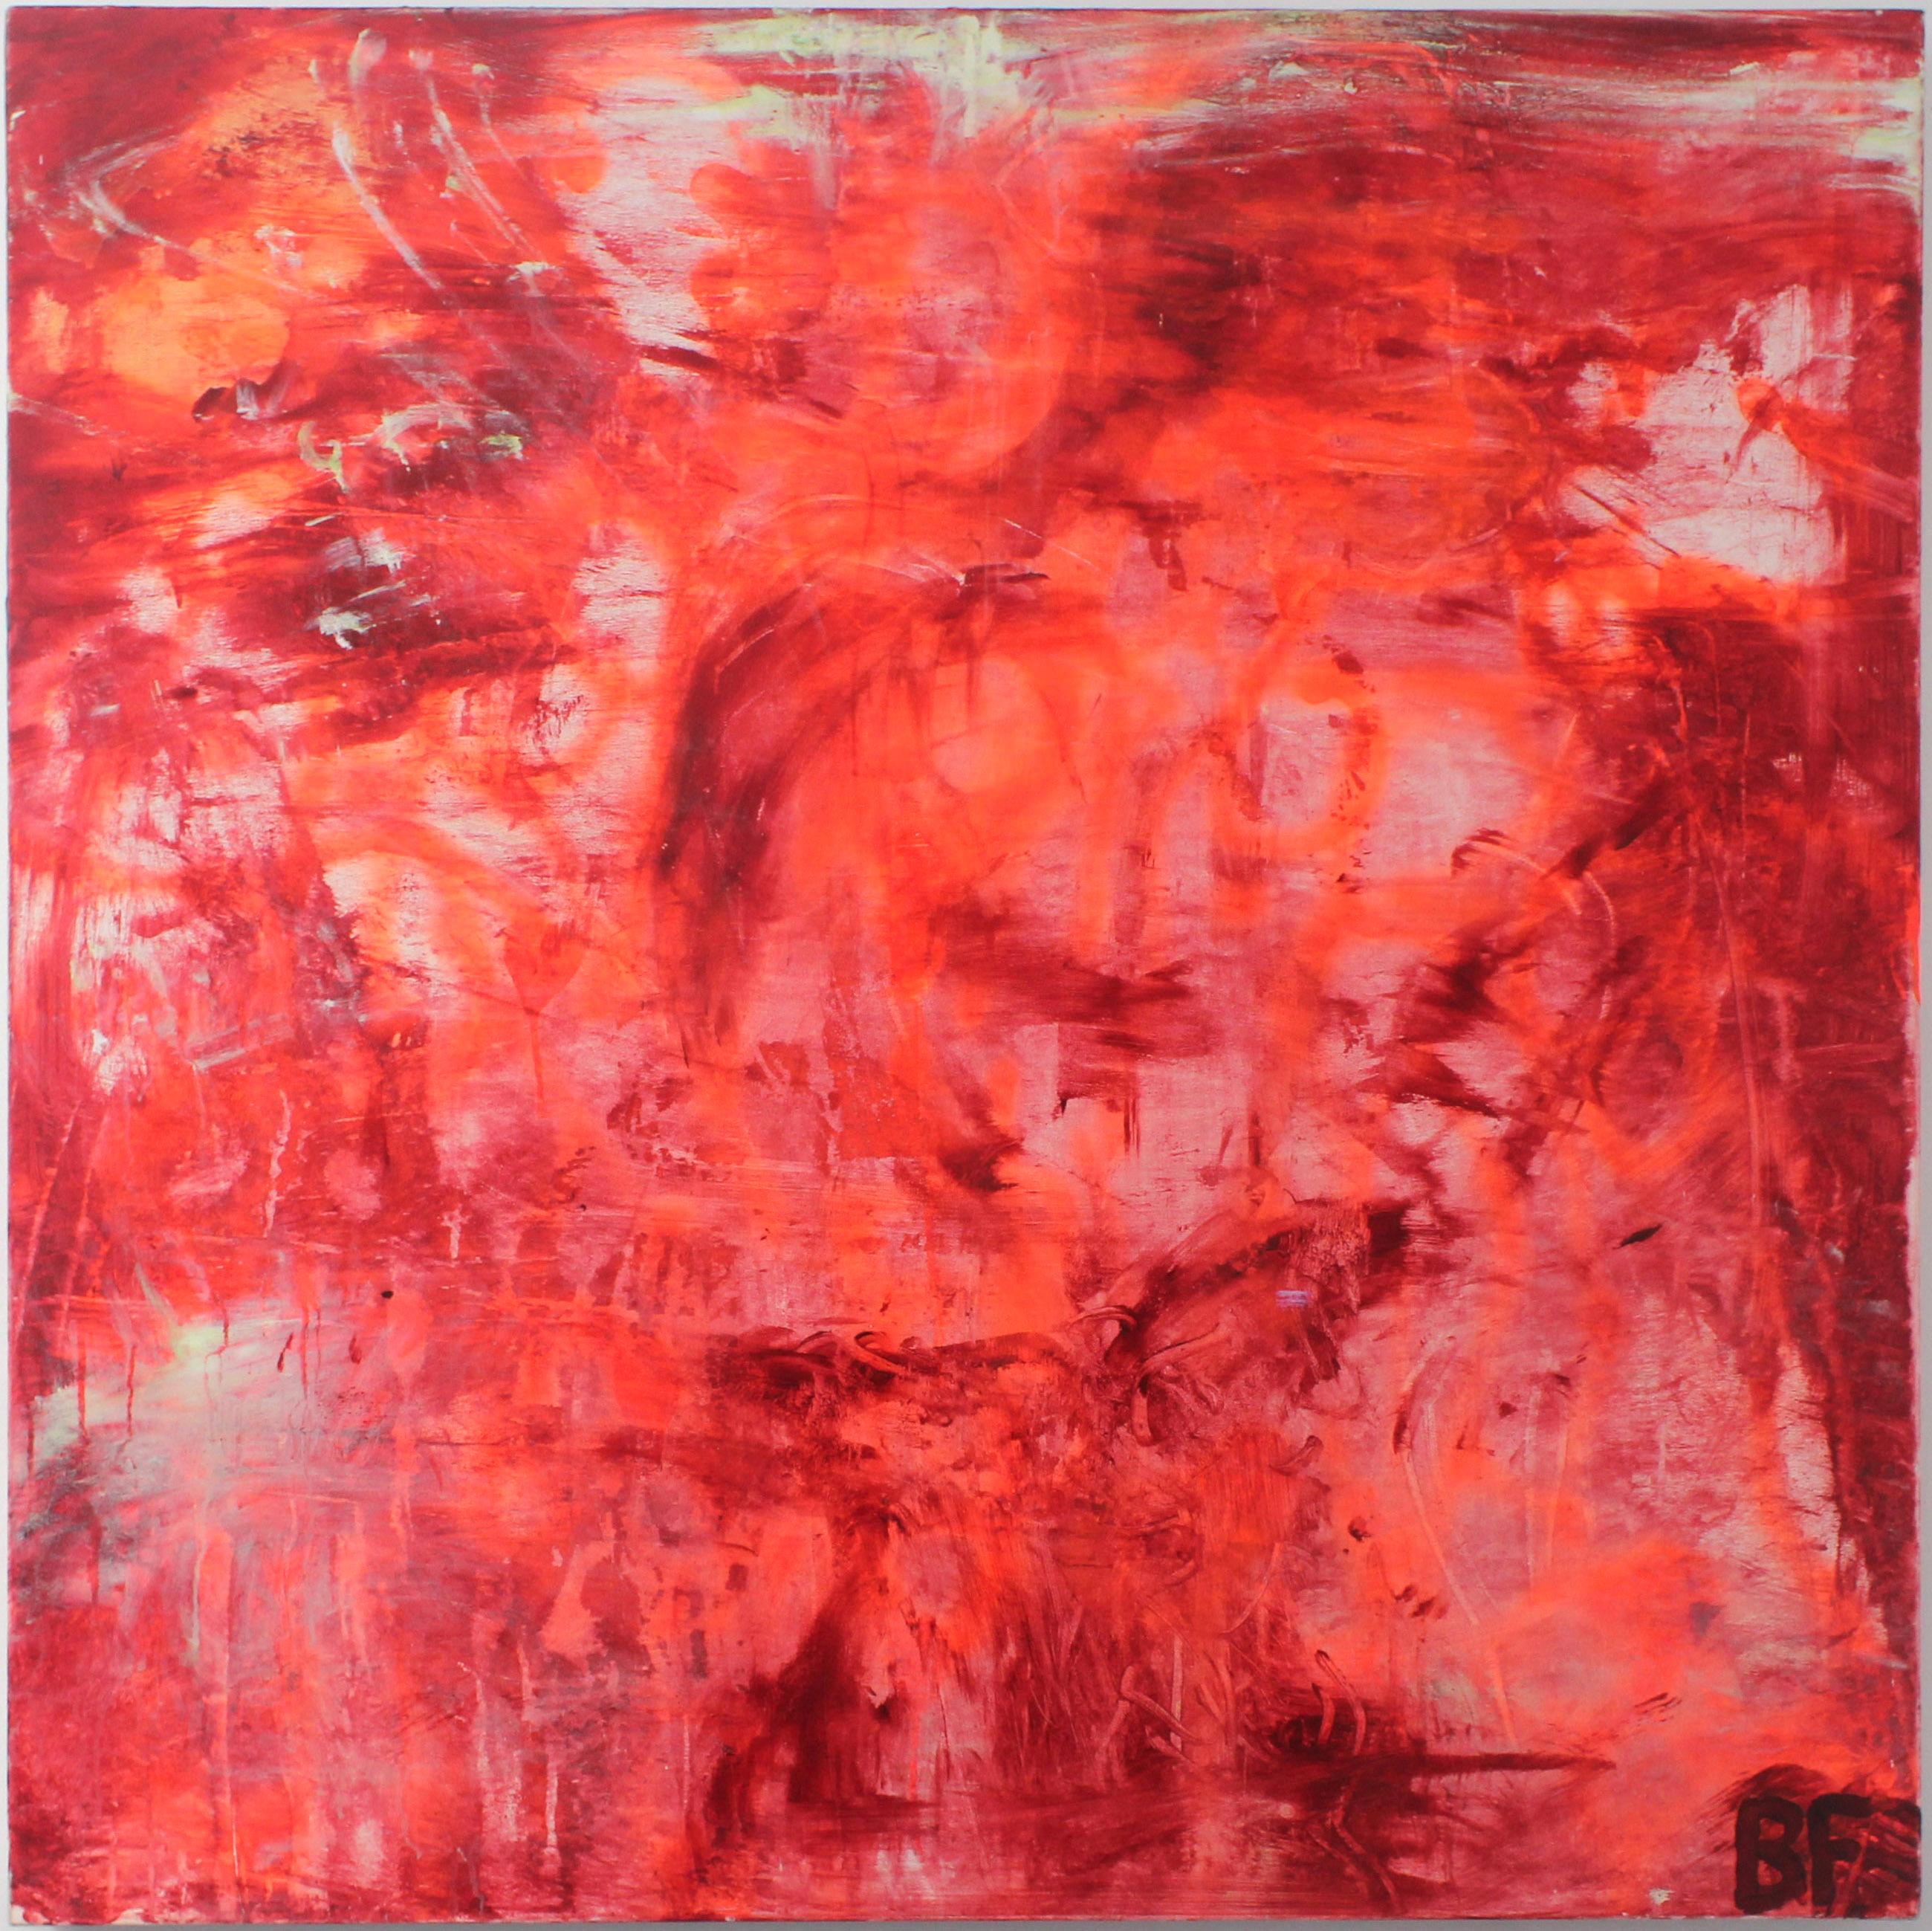 Big Red #4

Mixed media on canvas

48 x 48 in.

Shipping is not included. See our shipping policies. Please contact us for shipping quotes and customization options. 
 

All sales are final.